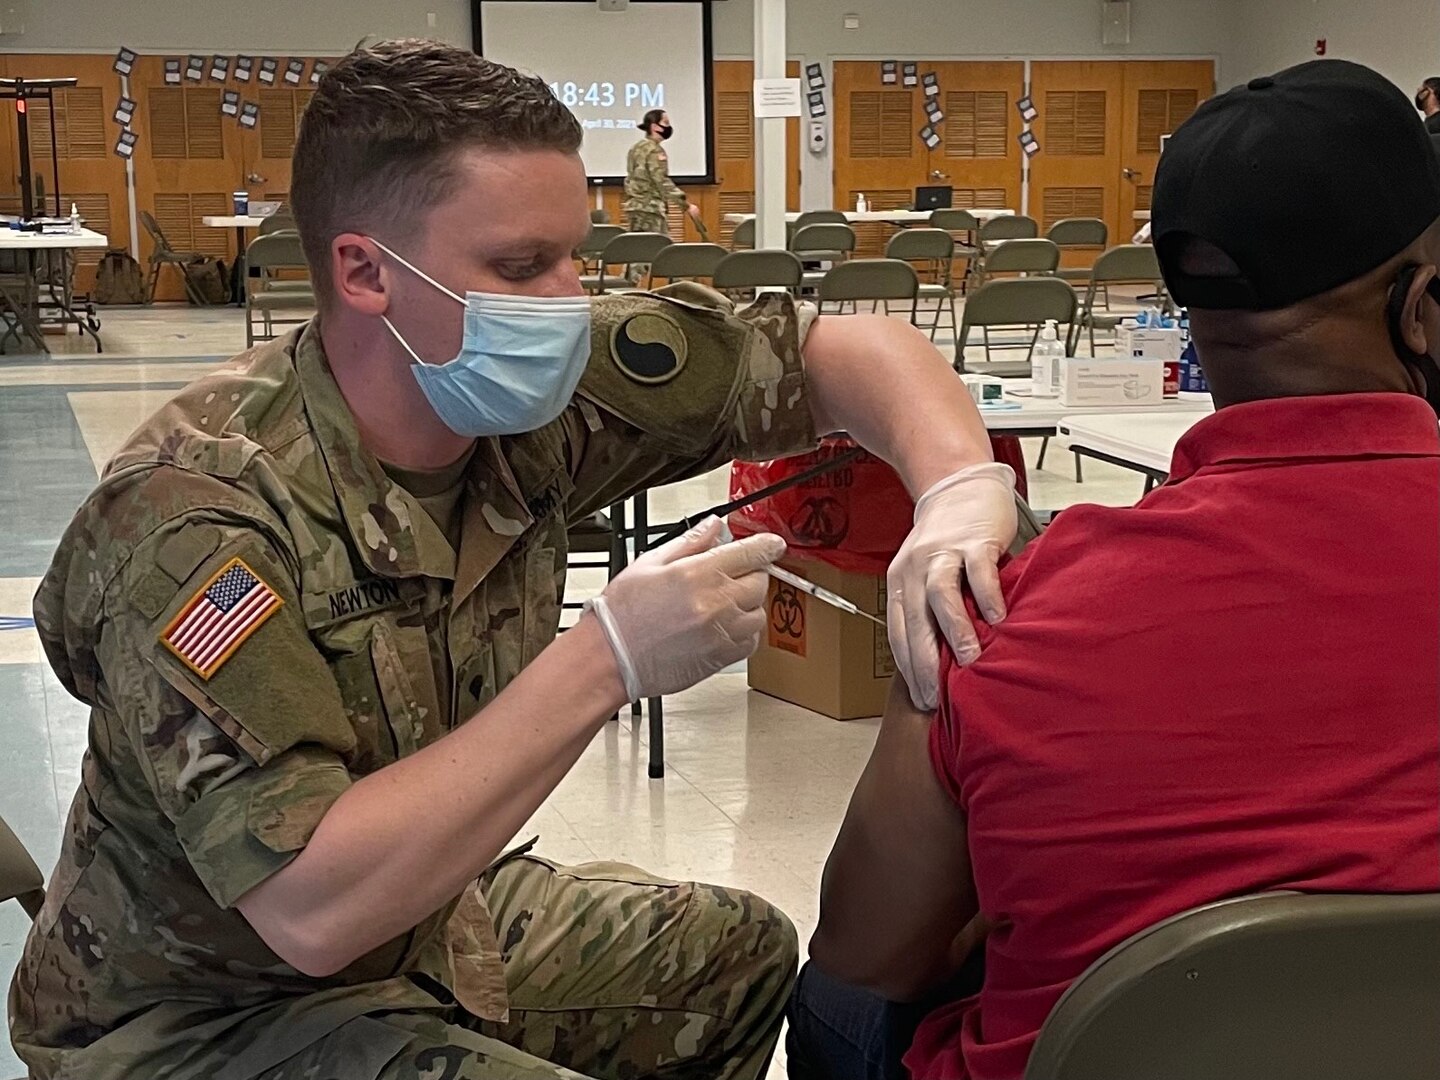 A Virginia National Guard Soldier vaccinates a citizen during a mobile COVID-19 vaccination clinic in Norfolk, Virginia. VNG teams are supporting a Federal Emergency Management Agency vaccine hub with mobile vaccination teams administering shots at satellite clinics in Hampton Roads.